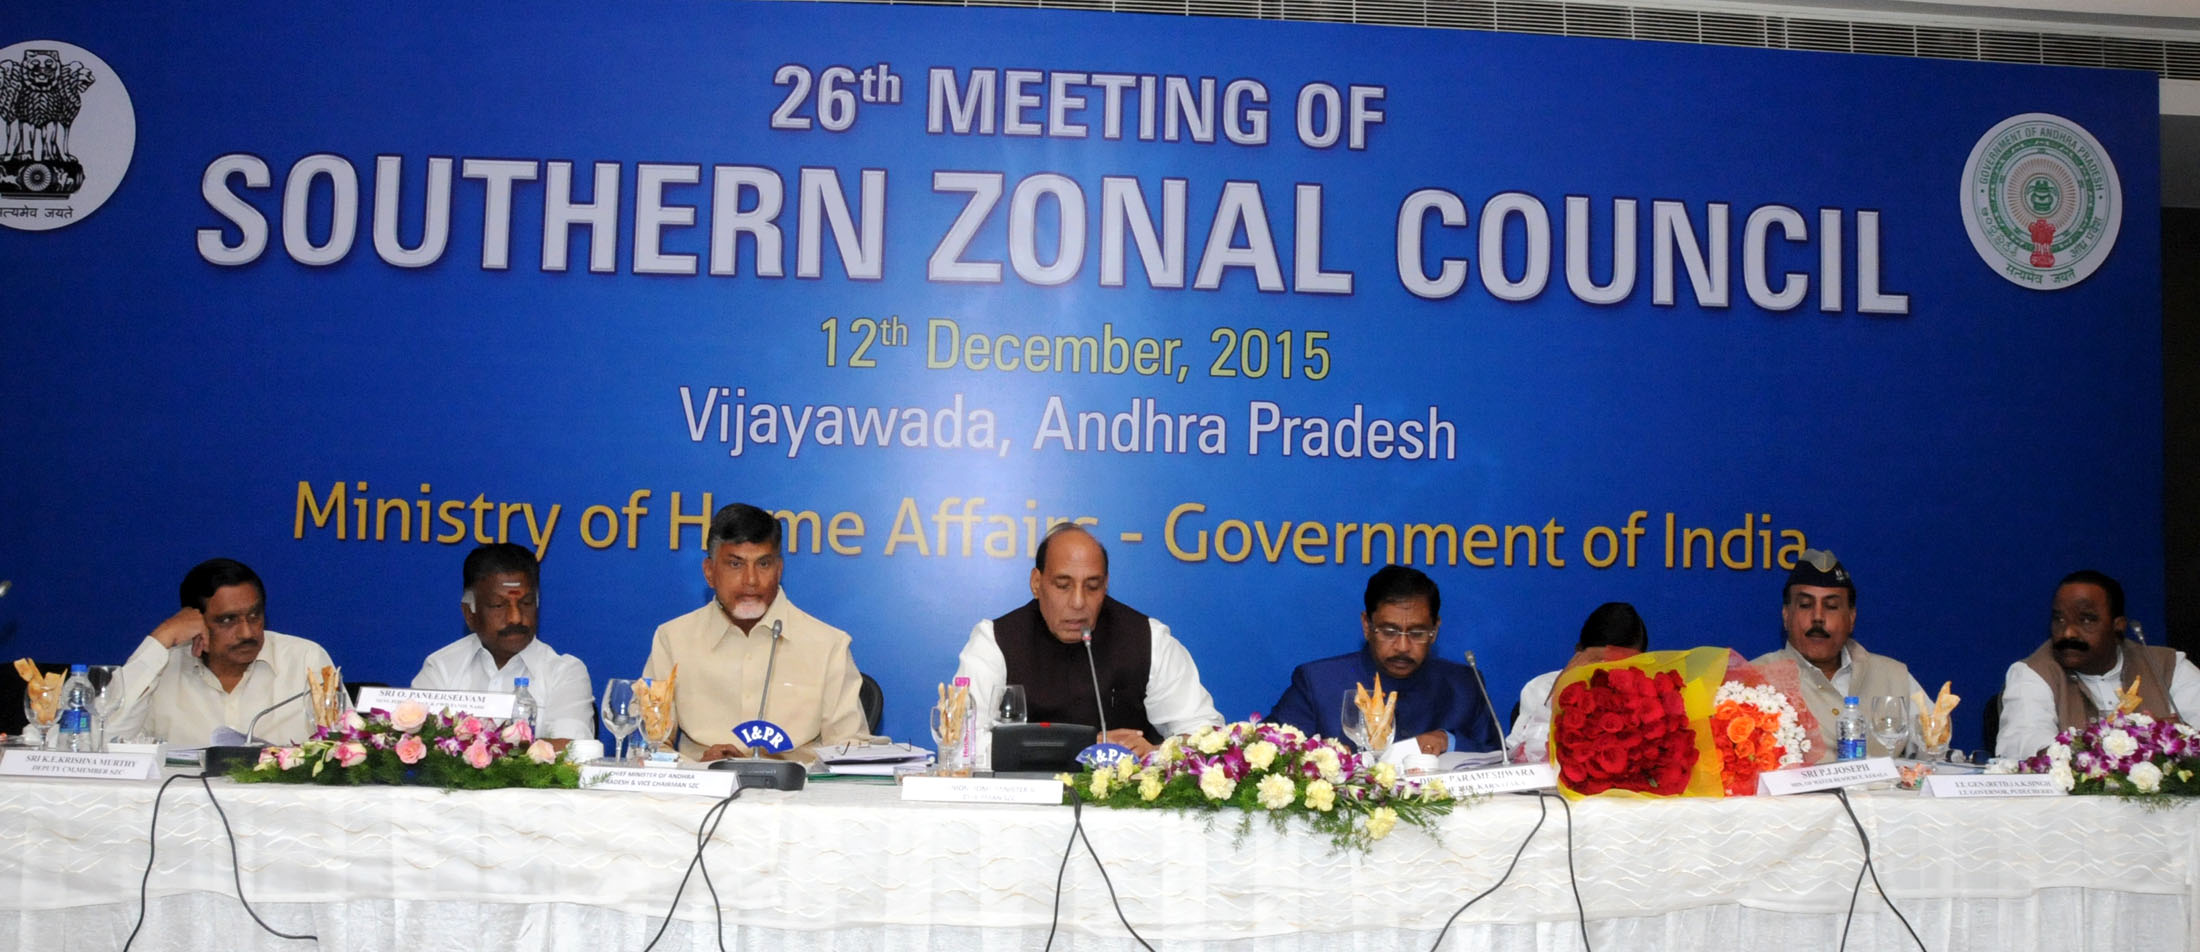 The Union Home Minister, Shri Rajnath Singh chairing the 26th Southern Zonal Council meeting, in Vijayawada, Andhra Pradesh on December 12, 2015. 	The Chief Minister of Andhra Pradesh, Shri N. Chandrababu Naidu and other dignitaries are also seen.